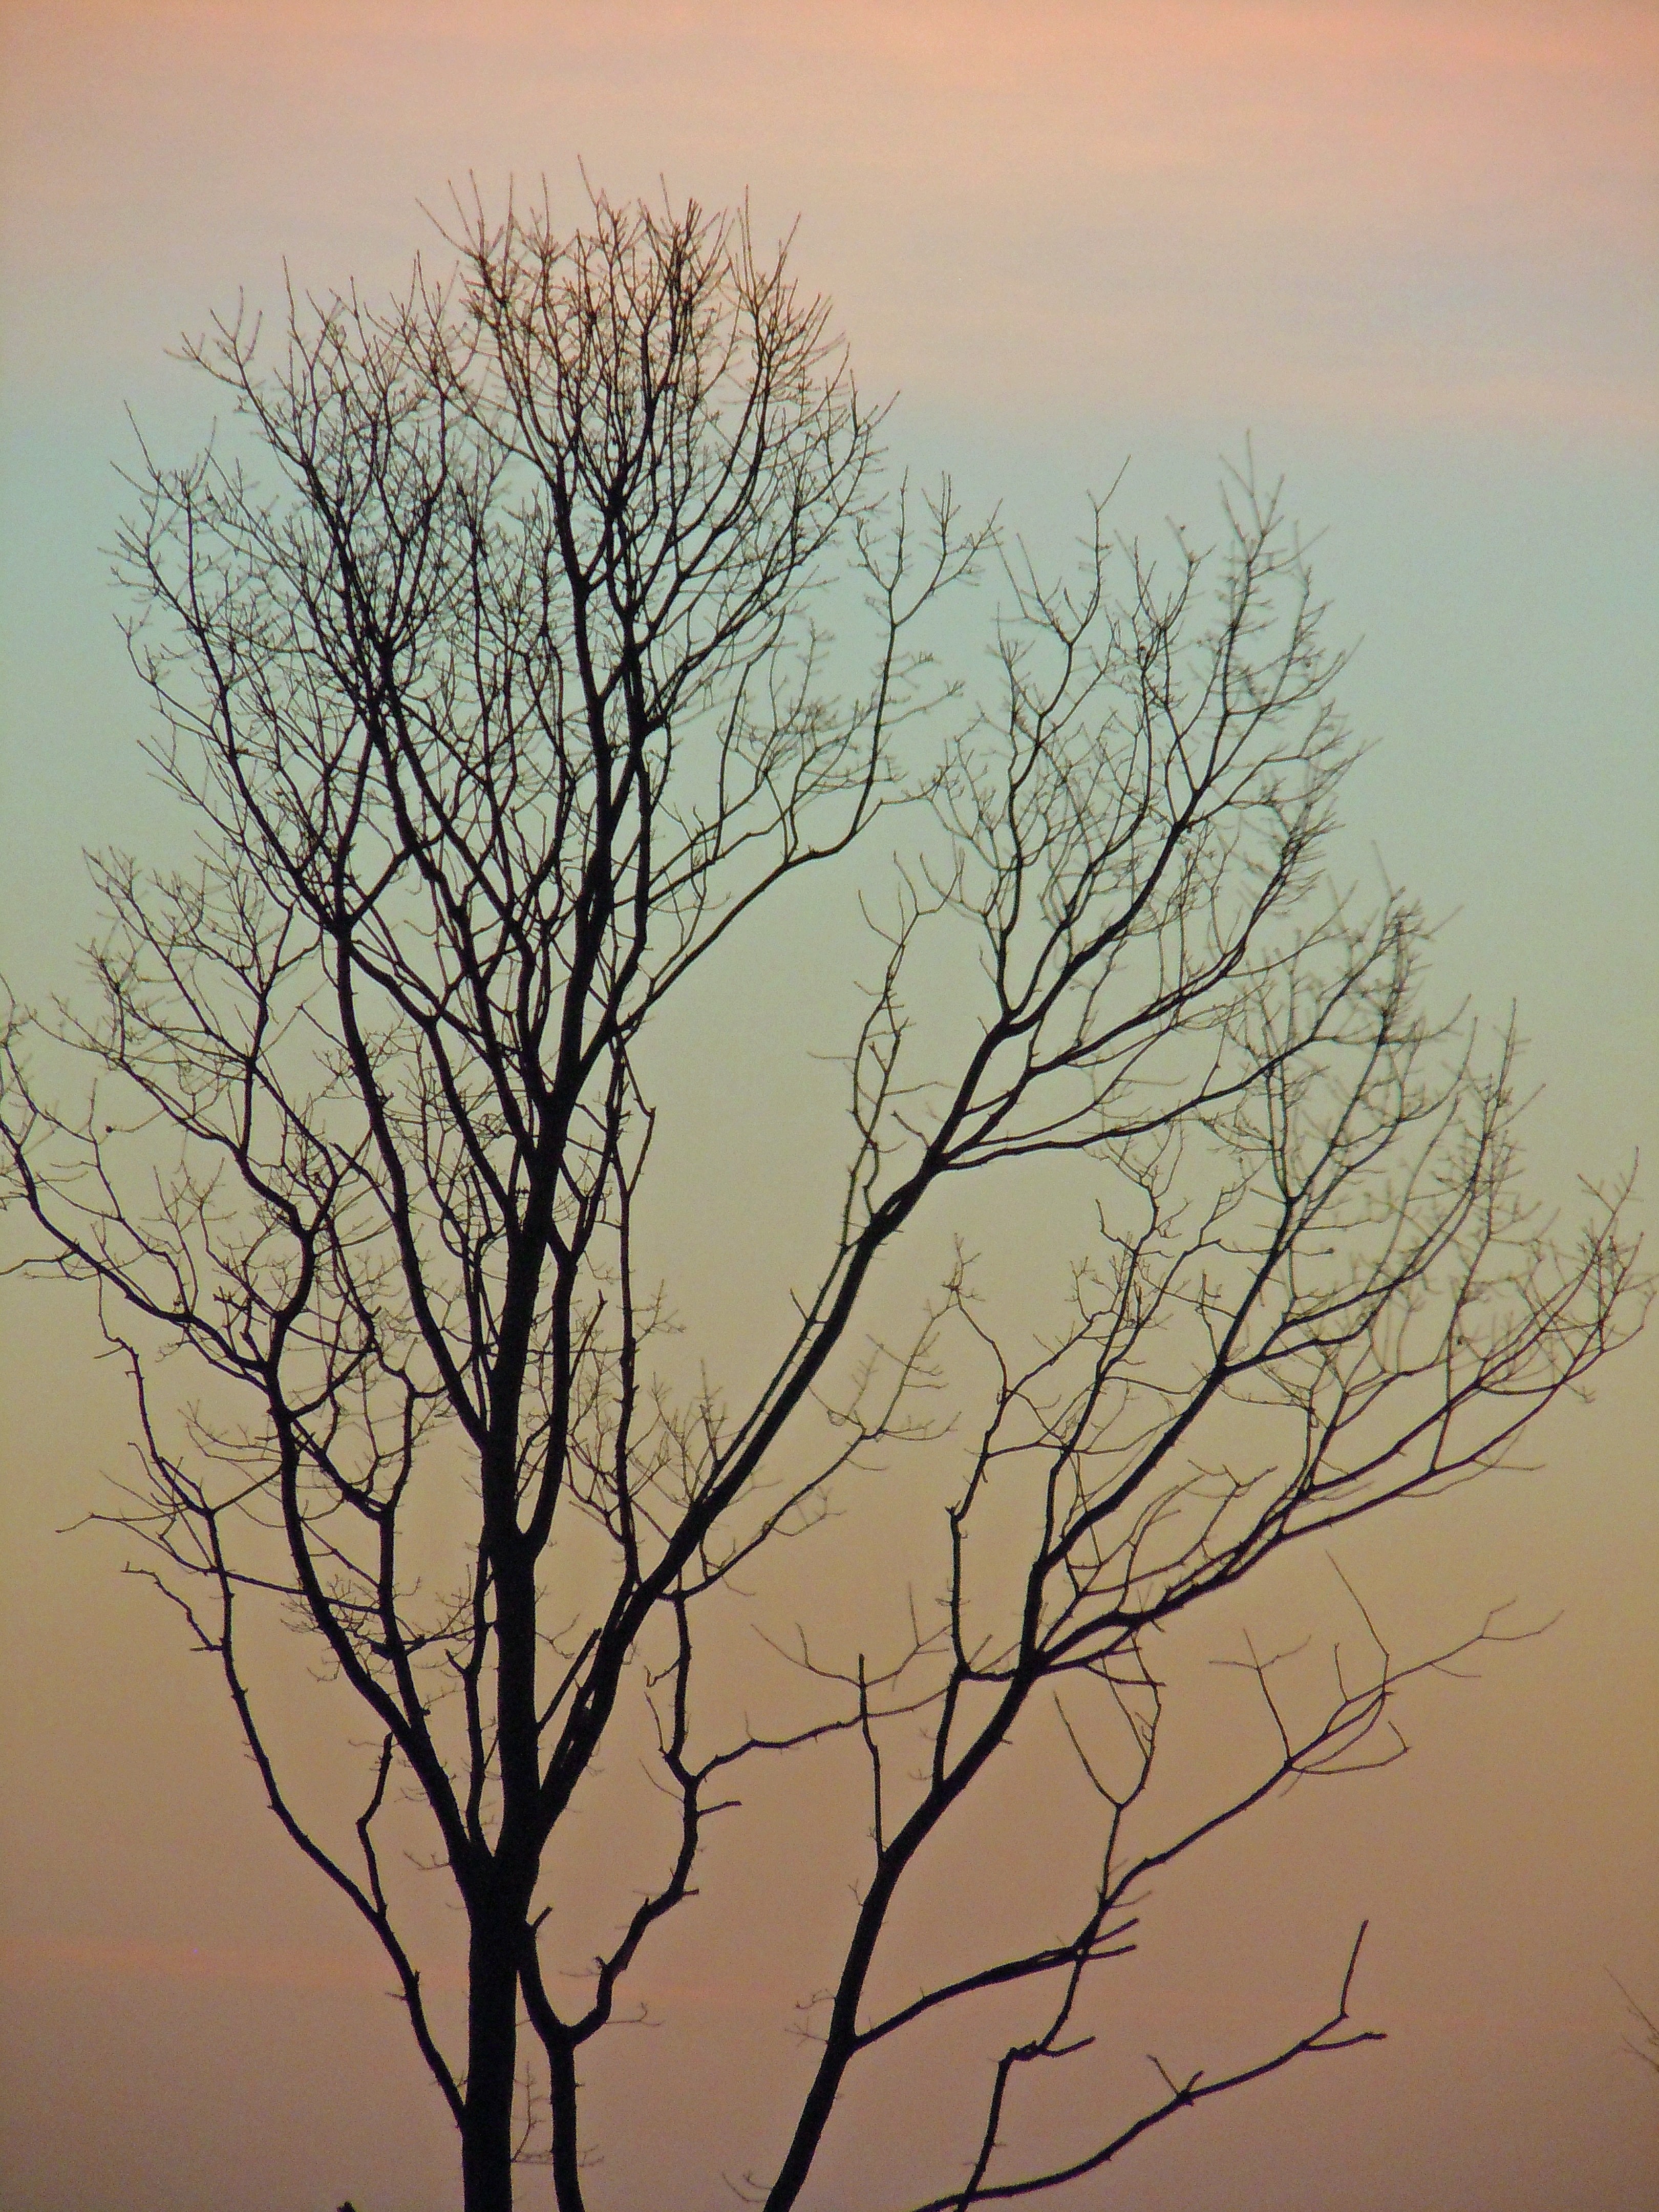 tree branch silhouette